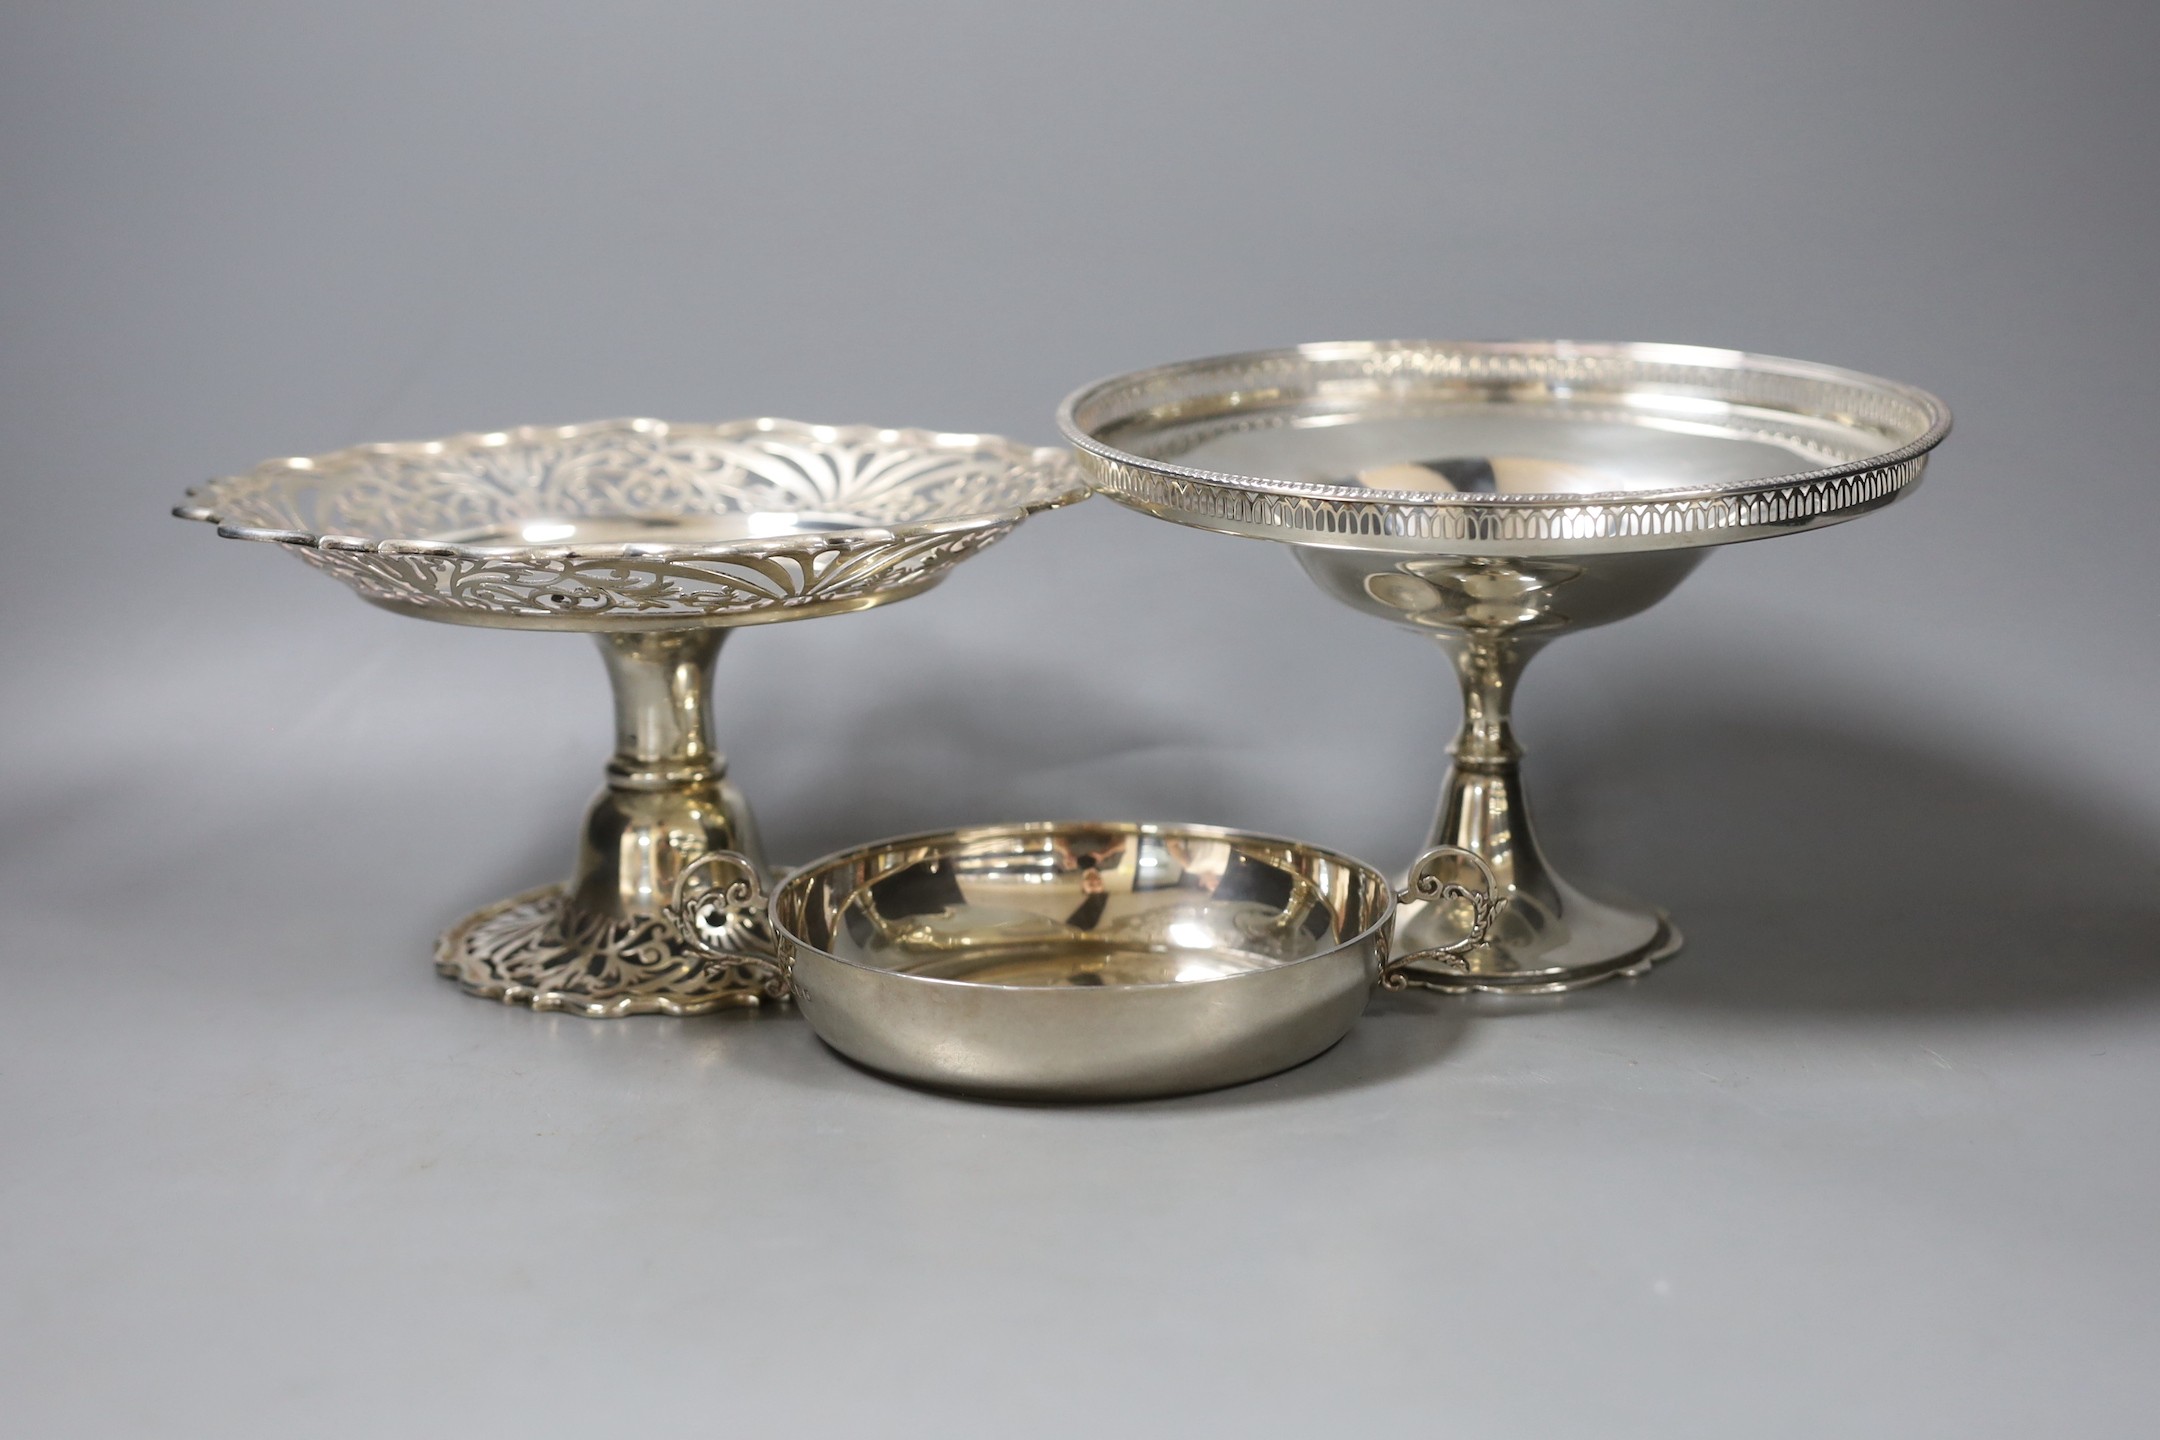 An Edwardian pieced silver tazze, London, 1901, diameter 20cm, a later silver pedestal dish and two handled shallow dish, 25oz.